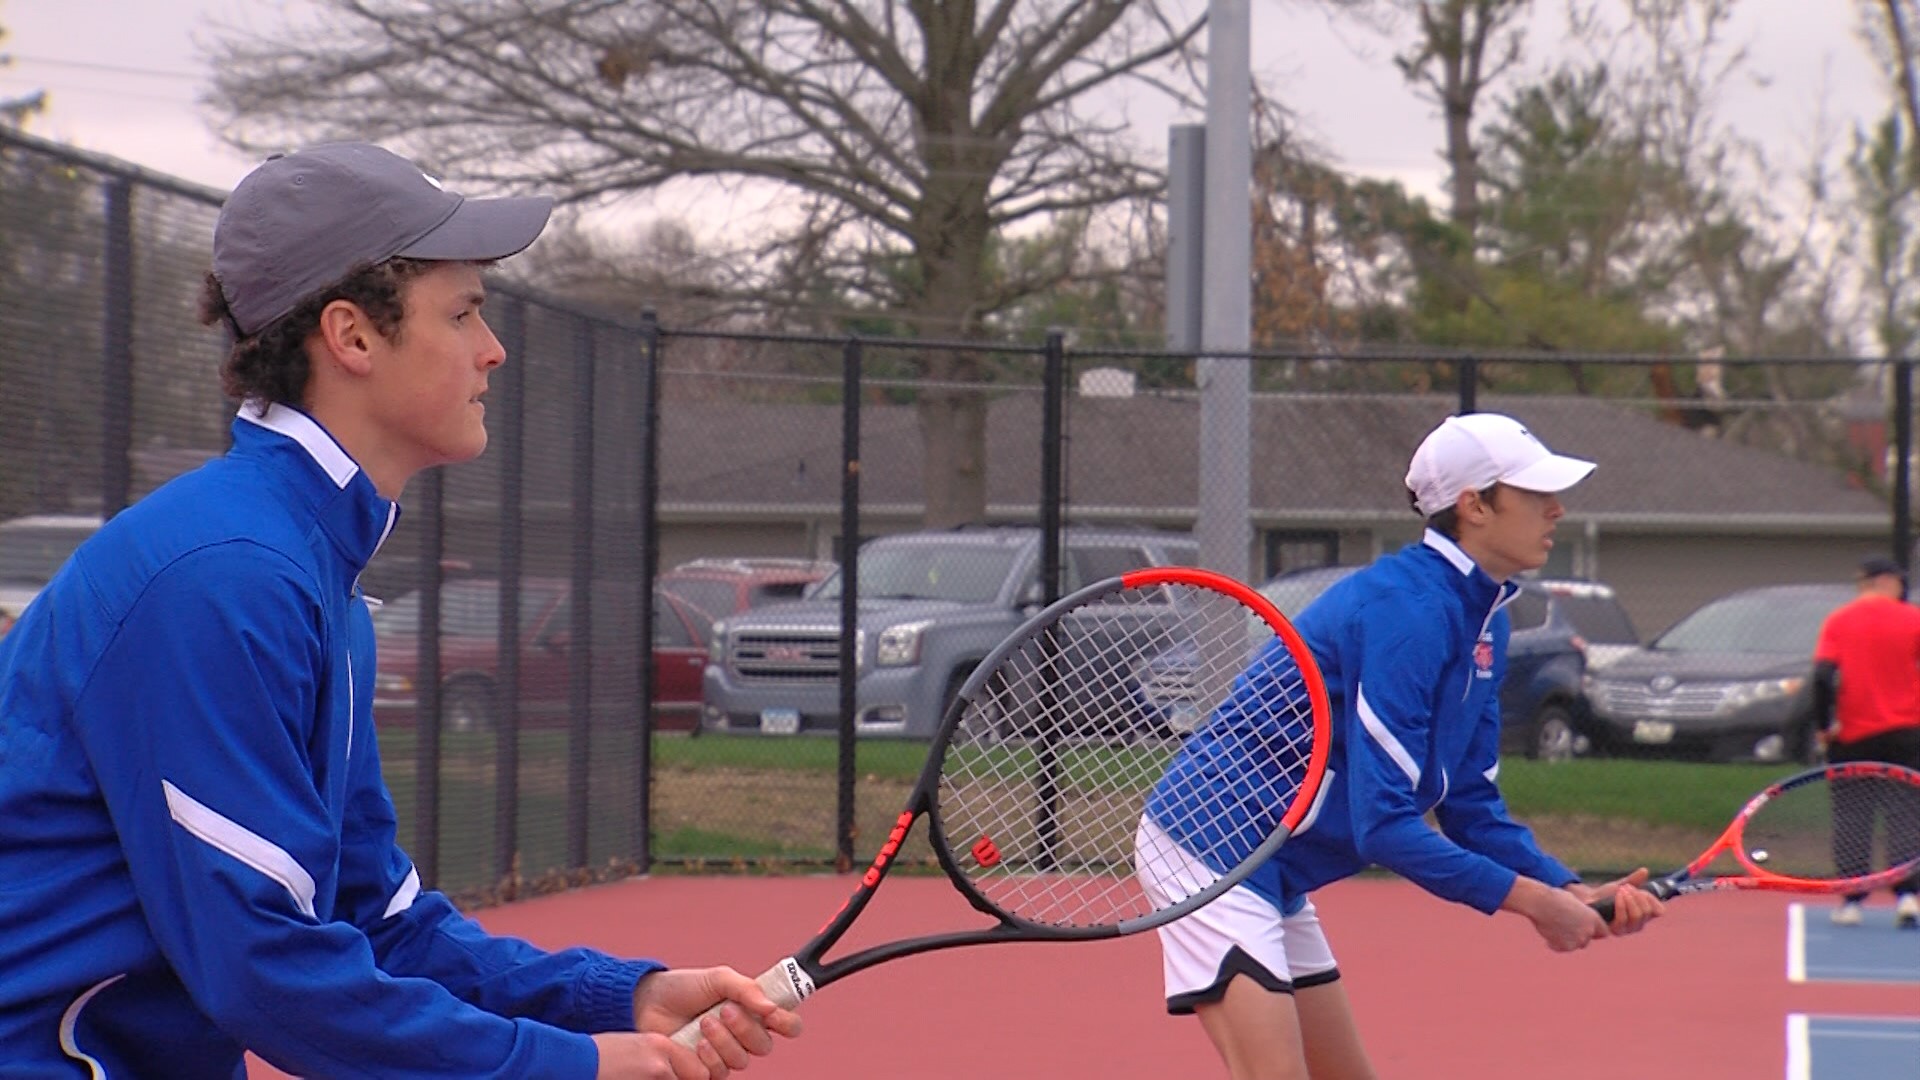 Kevin and Jason Strand have a chemistry that is helping lift the Marshalltown tennis team this season.